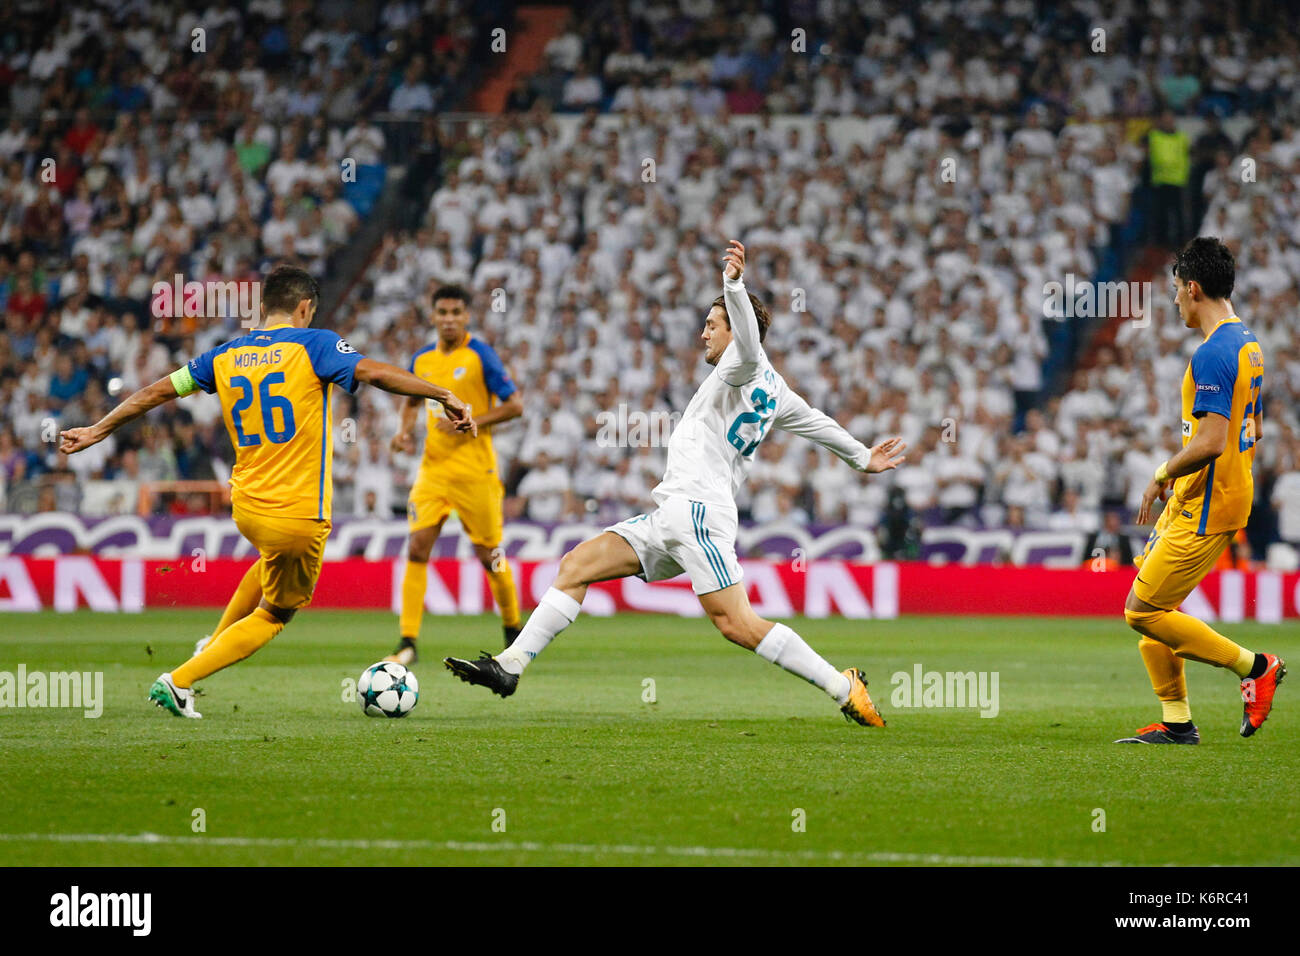 Madrid, Spain. 14th Sep, 2017. Mateo Kpvacic (23) Real Madrid's player. Nuno Morais (26) Apoel's player. UCL Champions League between Real Madrid vs Apoel at the Santiago Bernabeu stadium in Madrid, Spain, September 13, 2017 . Credit: Gtres Información más Comuniación on line, S.L./Alamy Live News Stock Photo